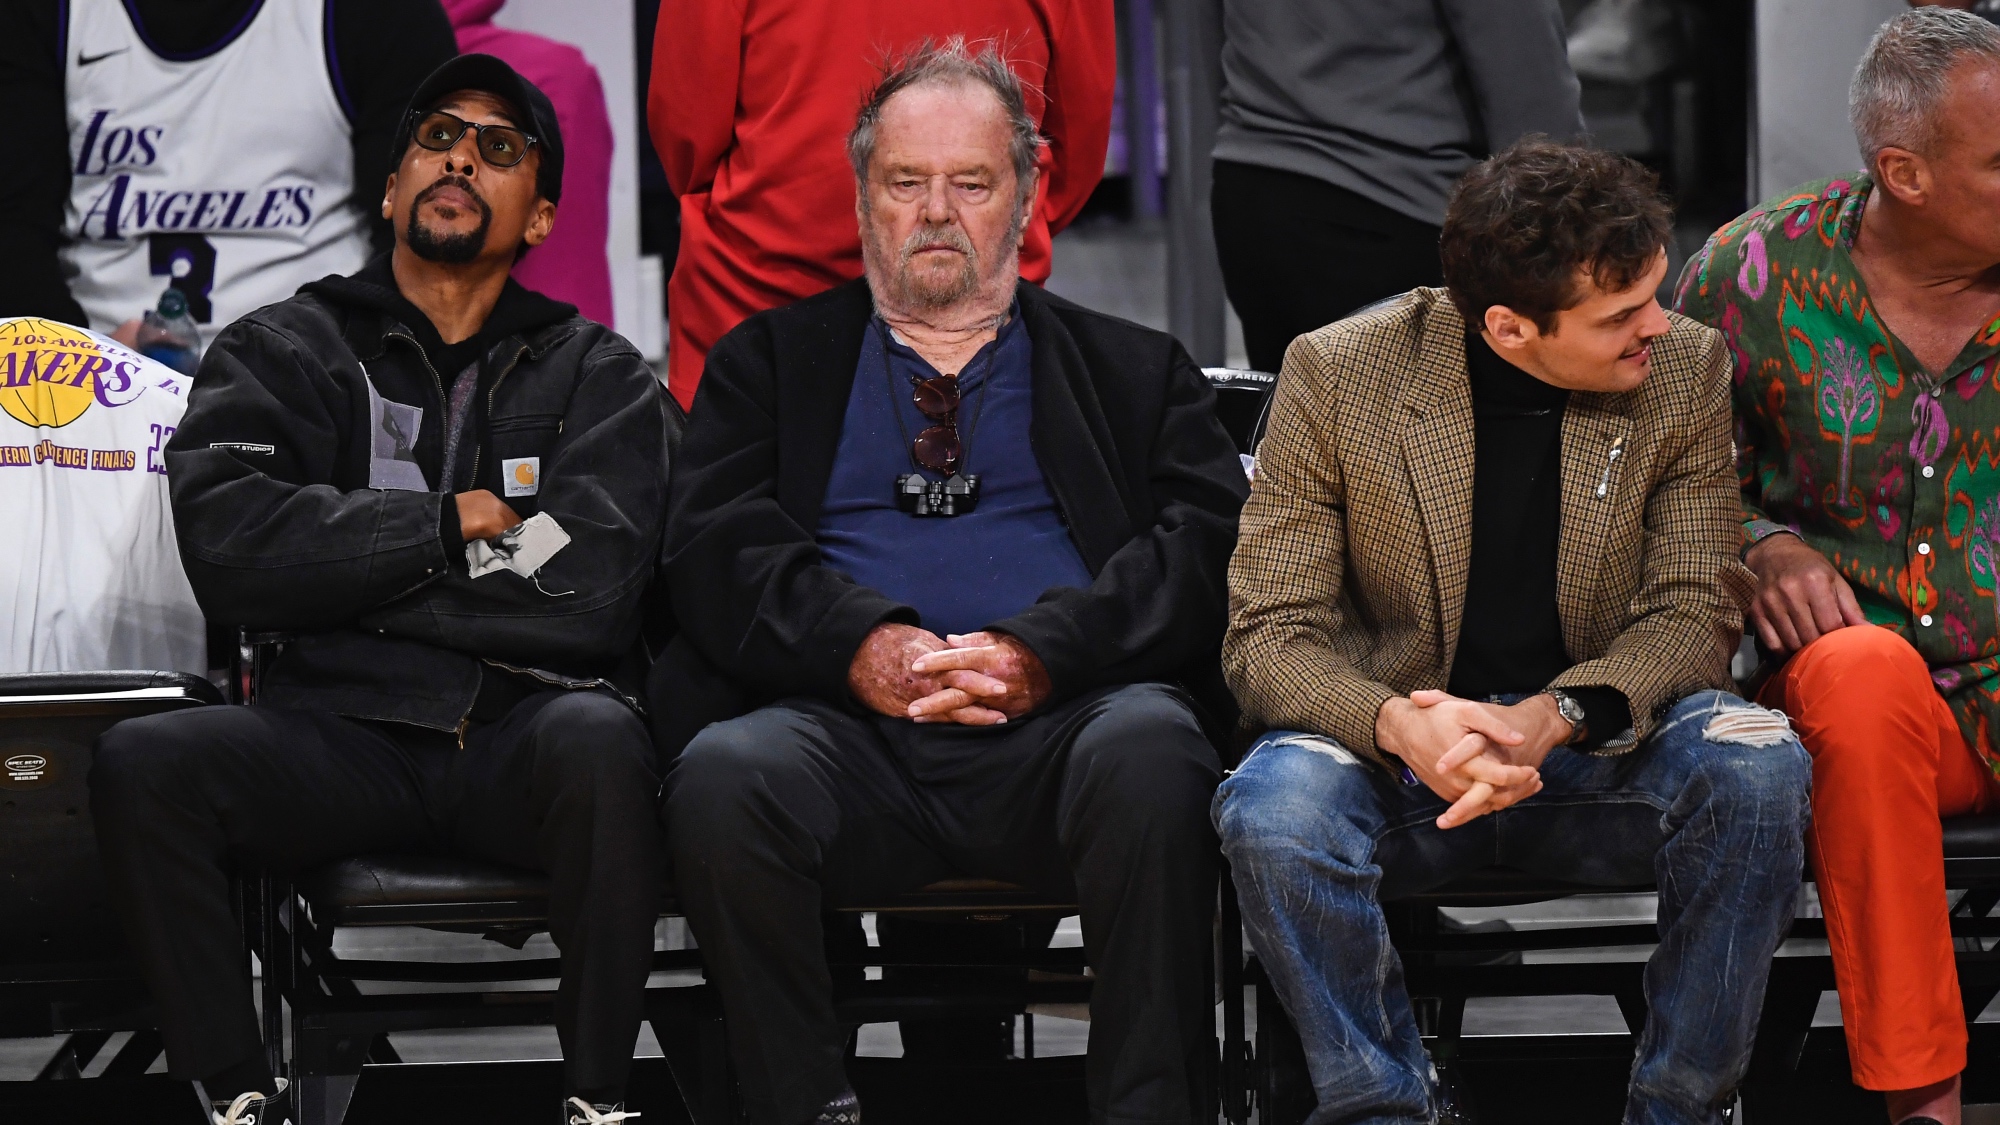 Jack Nicholson courtside at the Los Angeles Lakers game